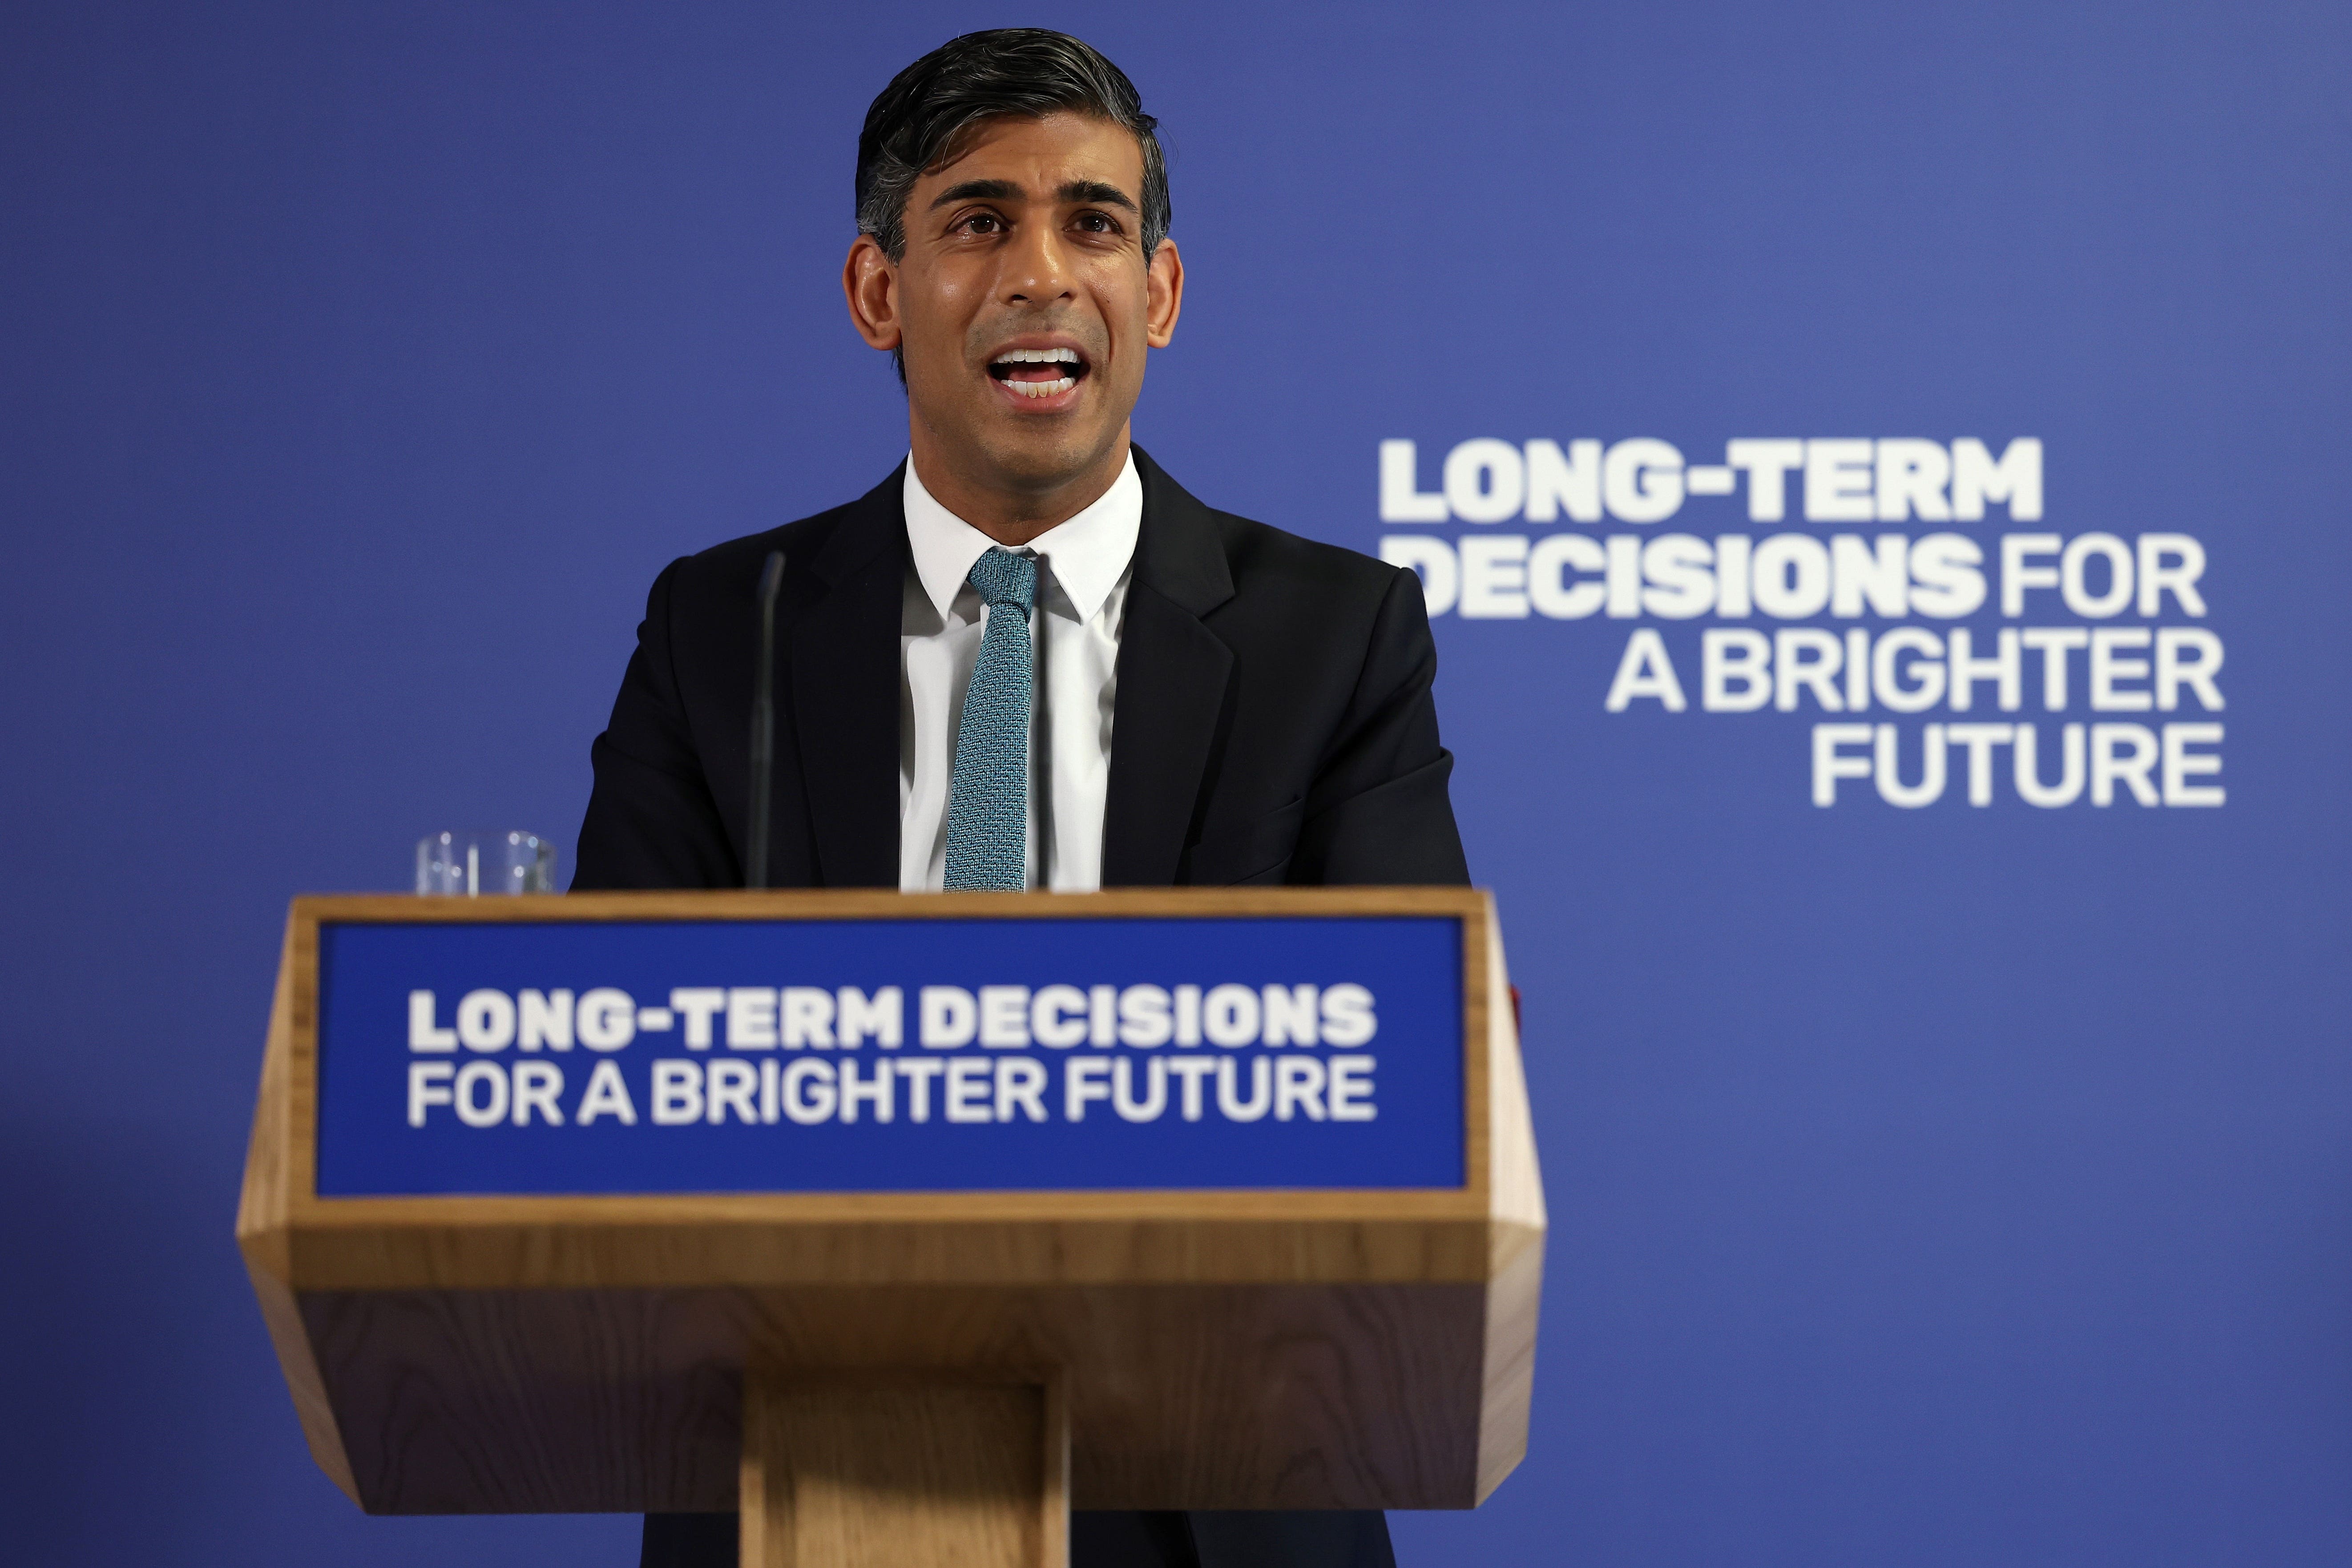 Prime Minister Rishi Sunak will be hoping to turn his political fortunes around